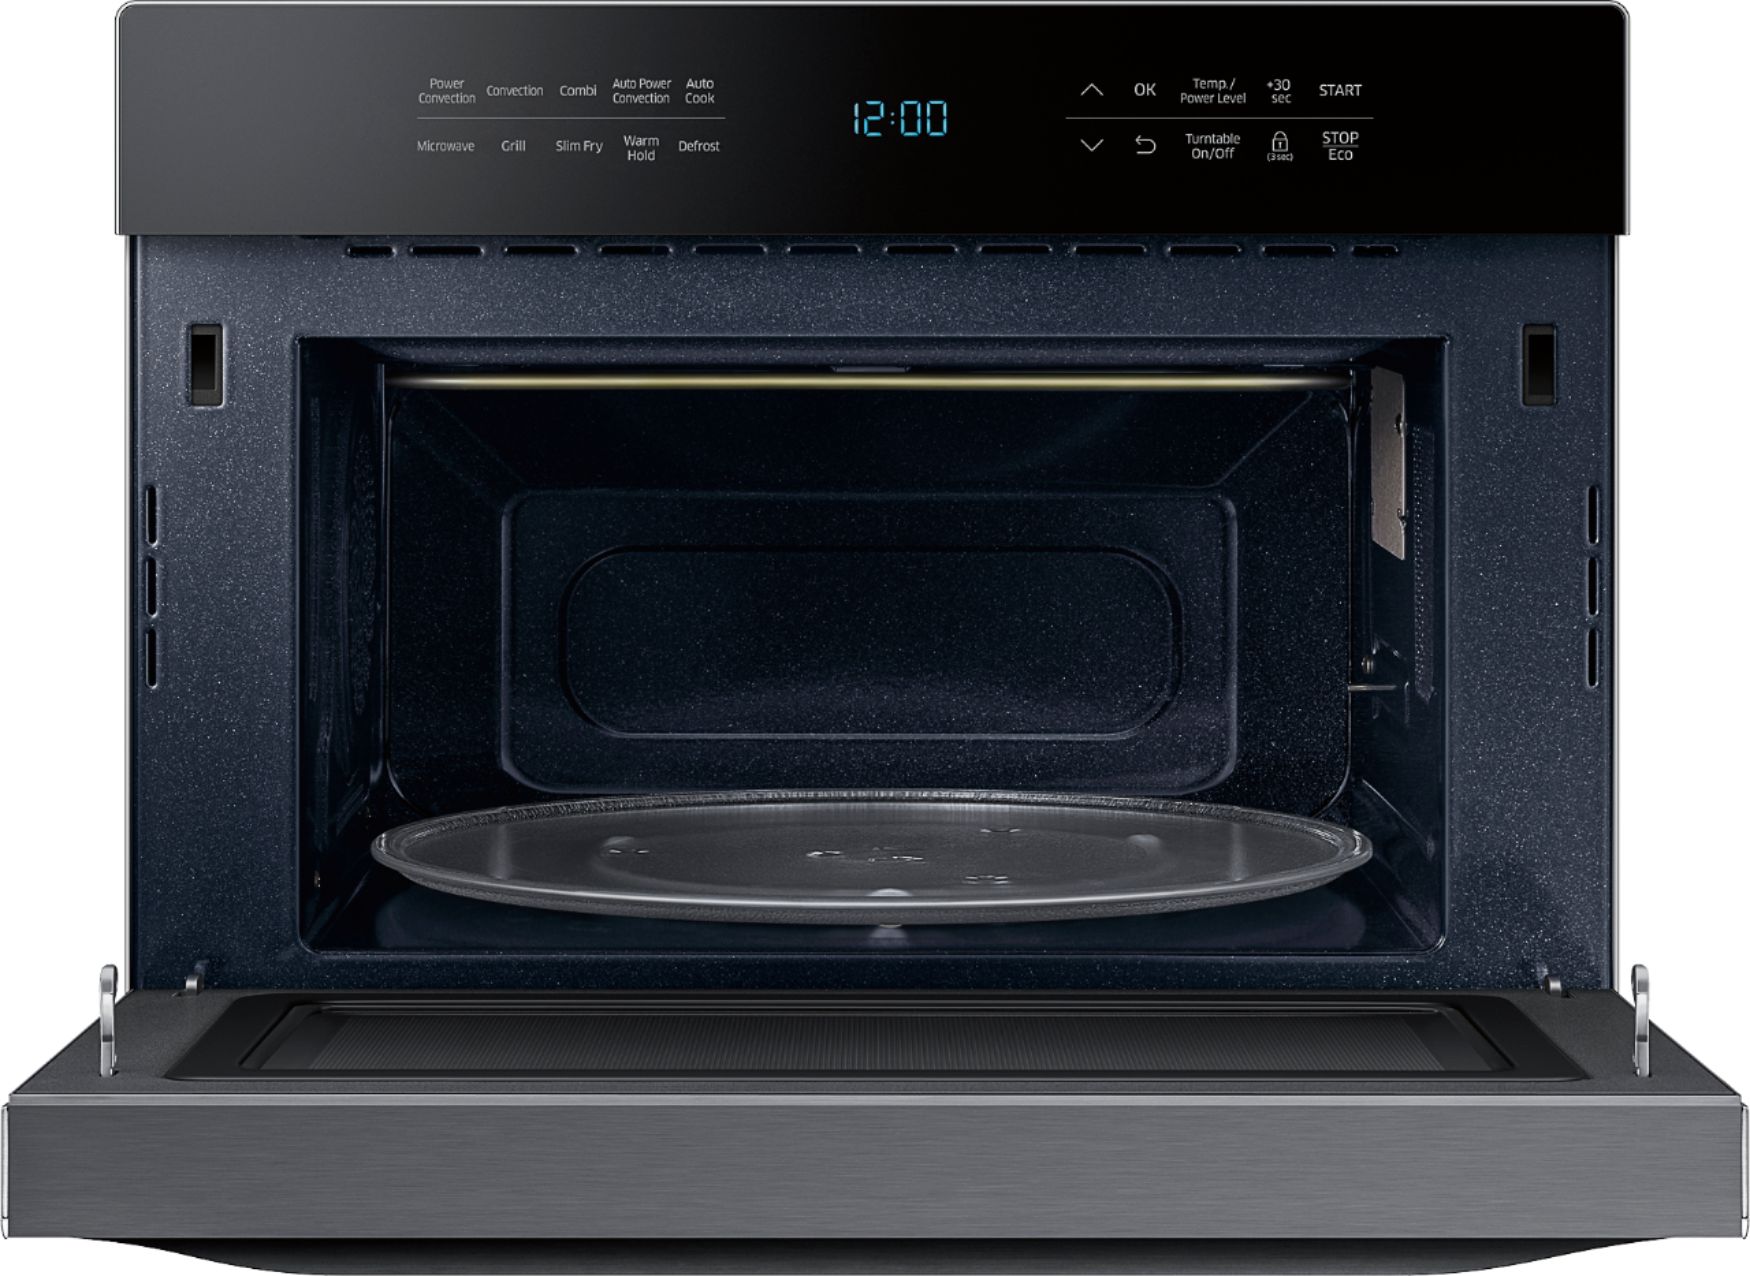 Samsung 1.2 cu. ft. Countertop Convection Microwave with PowerGrill